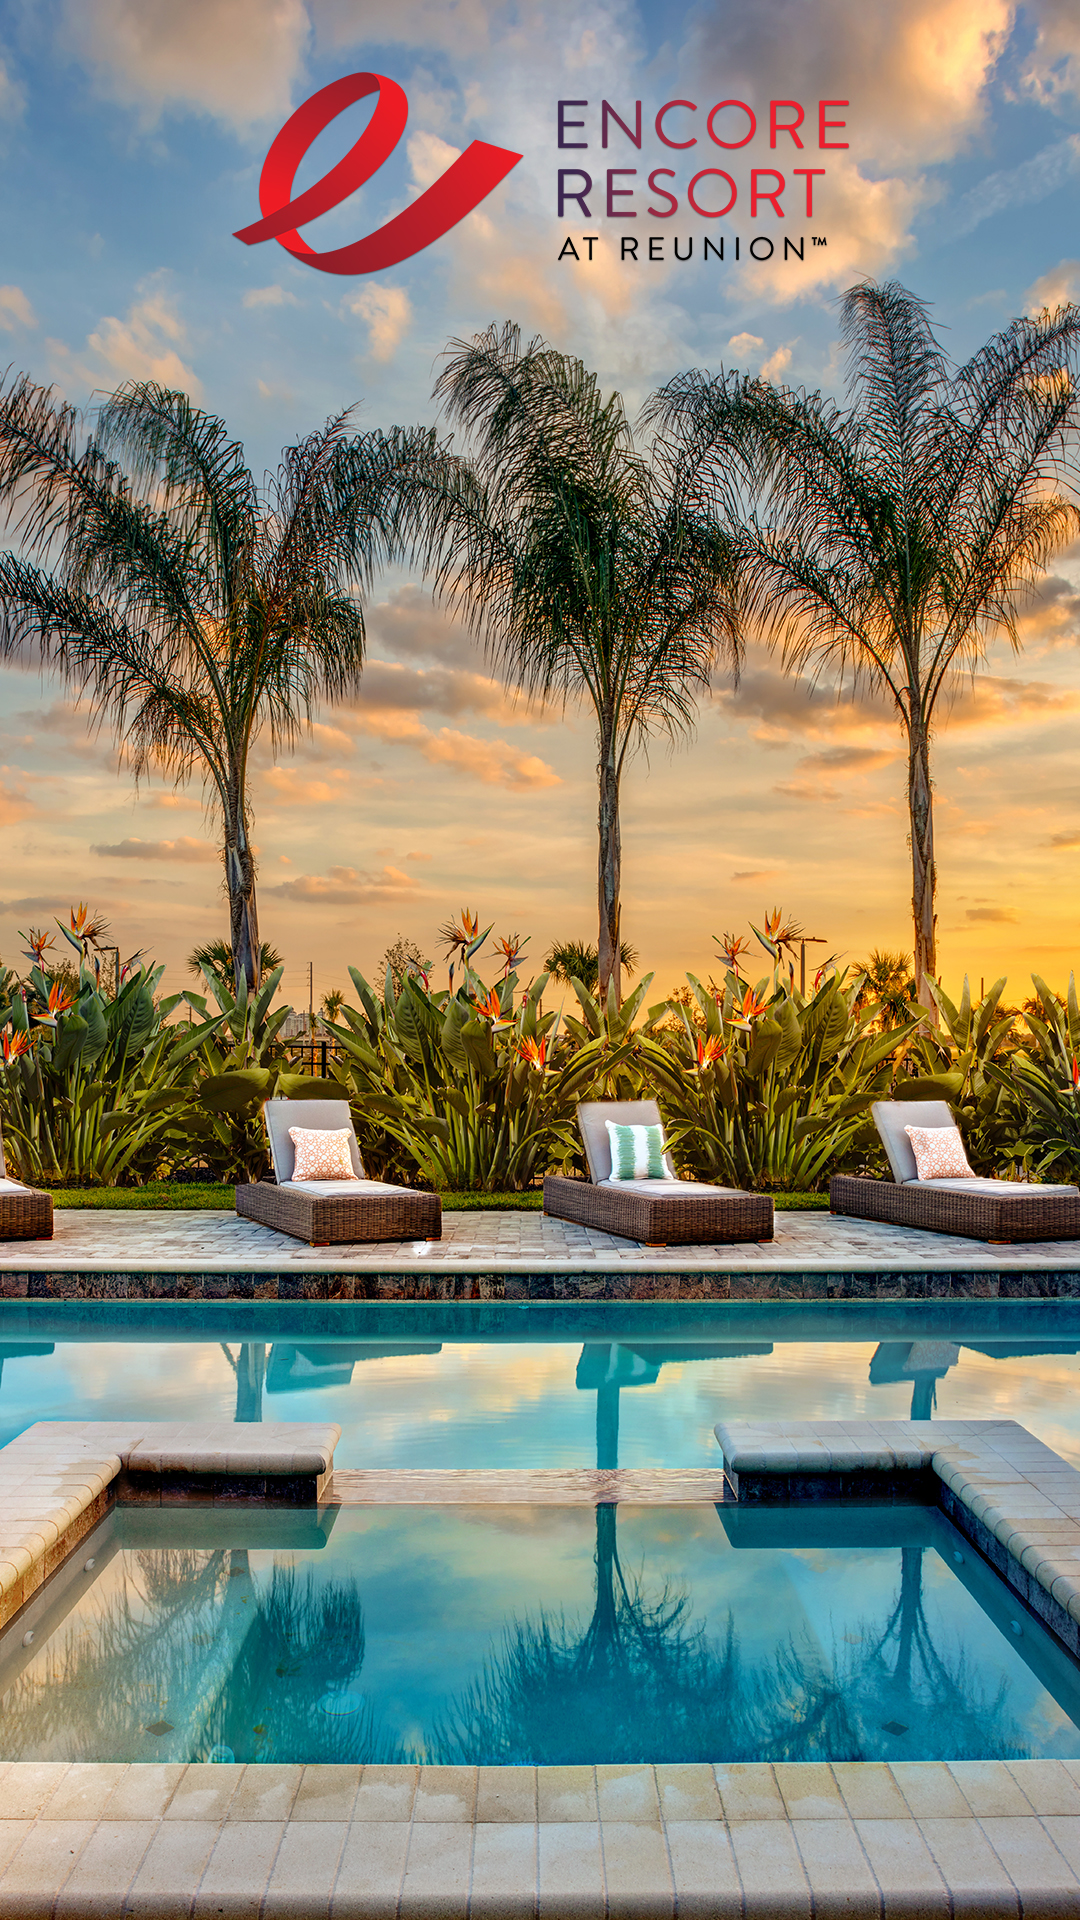 Mobile wallpaper featuring an Encore Resort vacation home private pool at sunset.